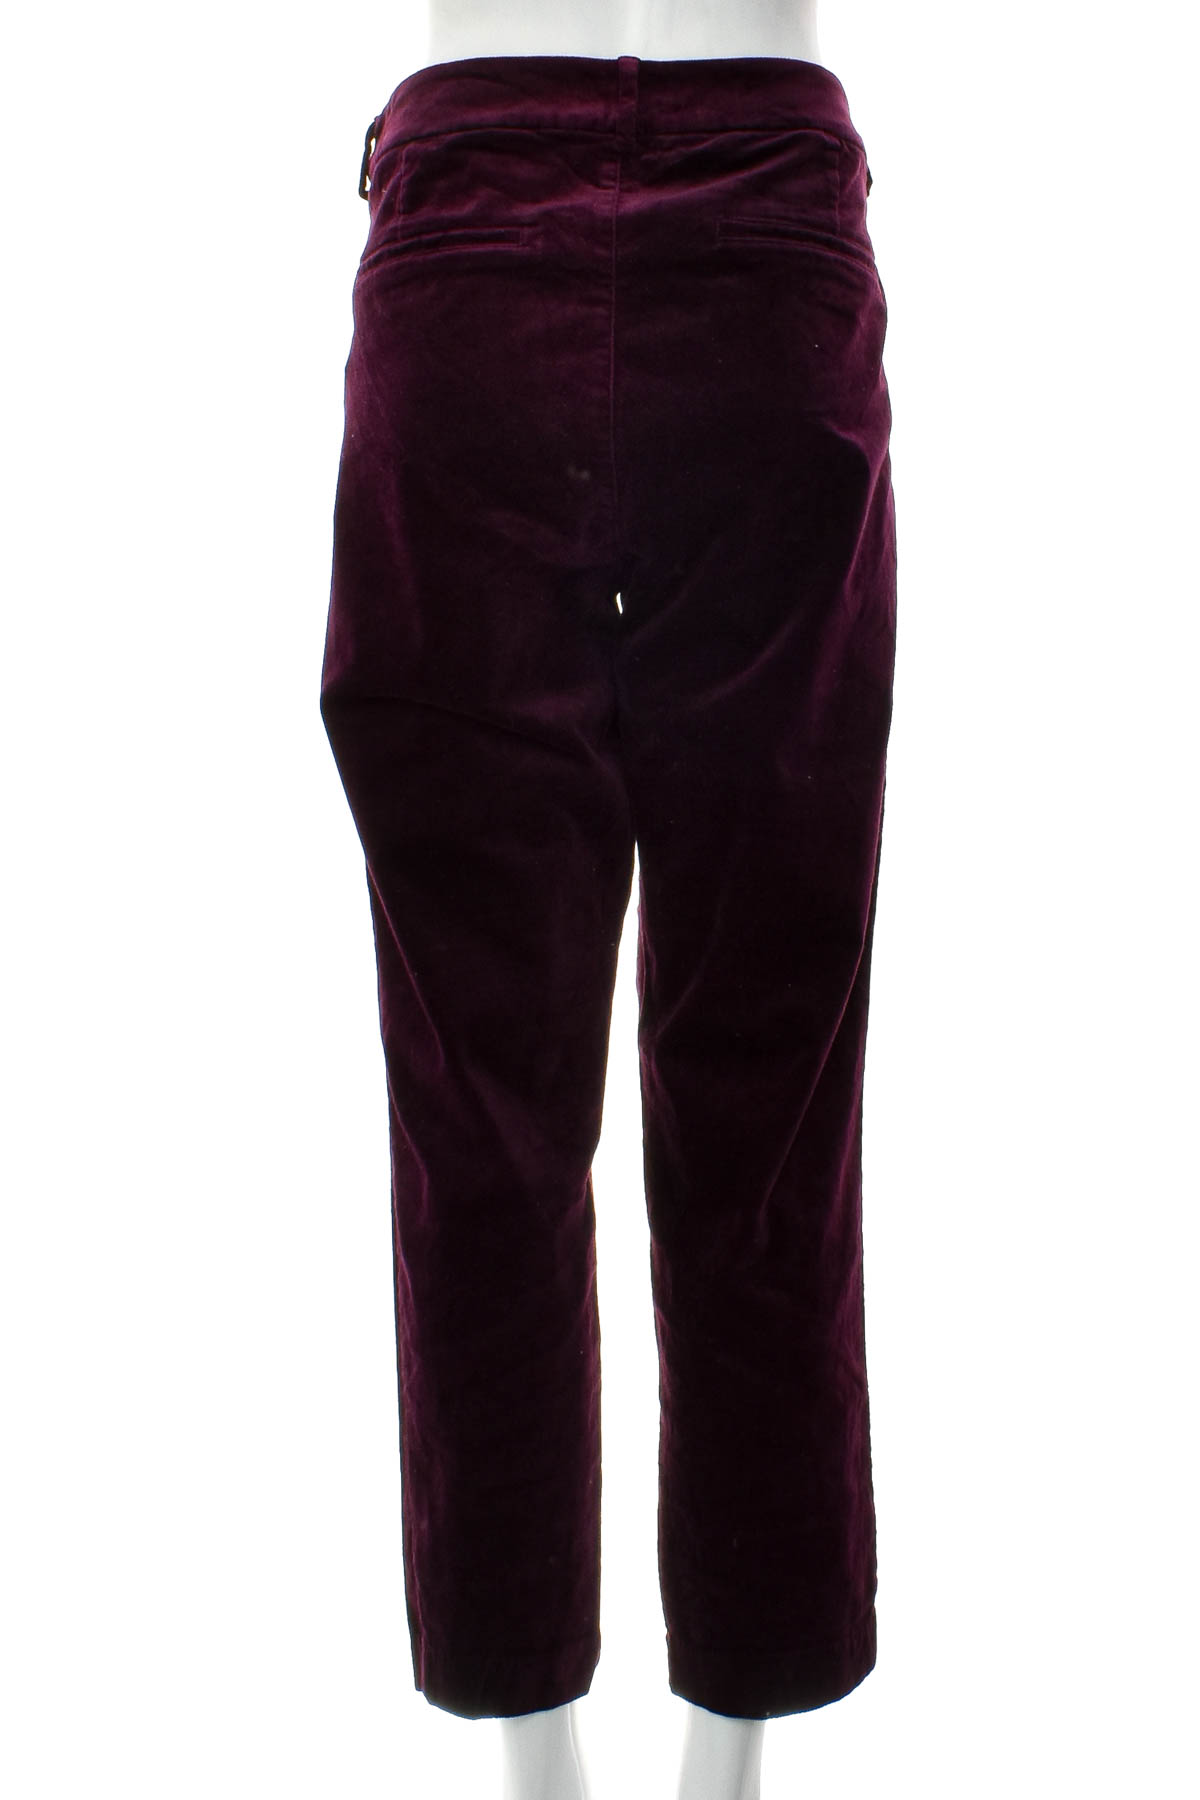 Women's trousers - OLD NAVY - 1